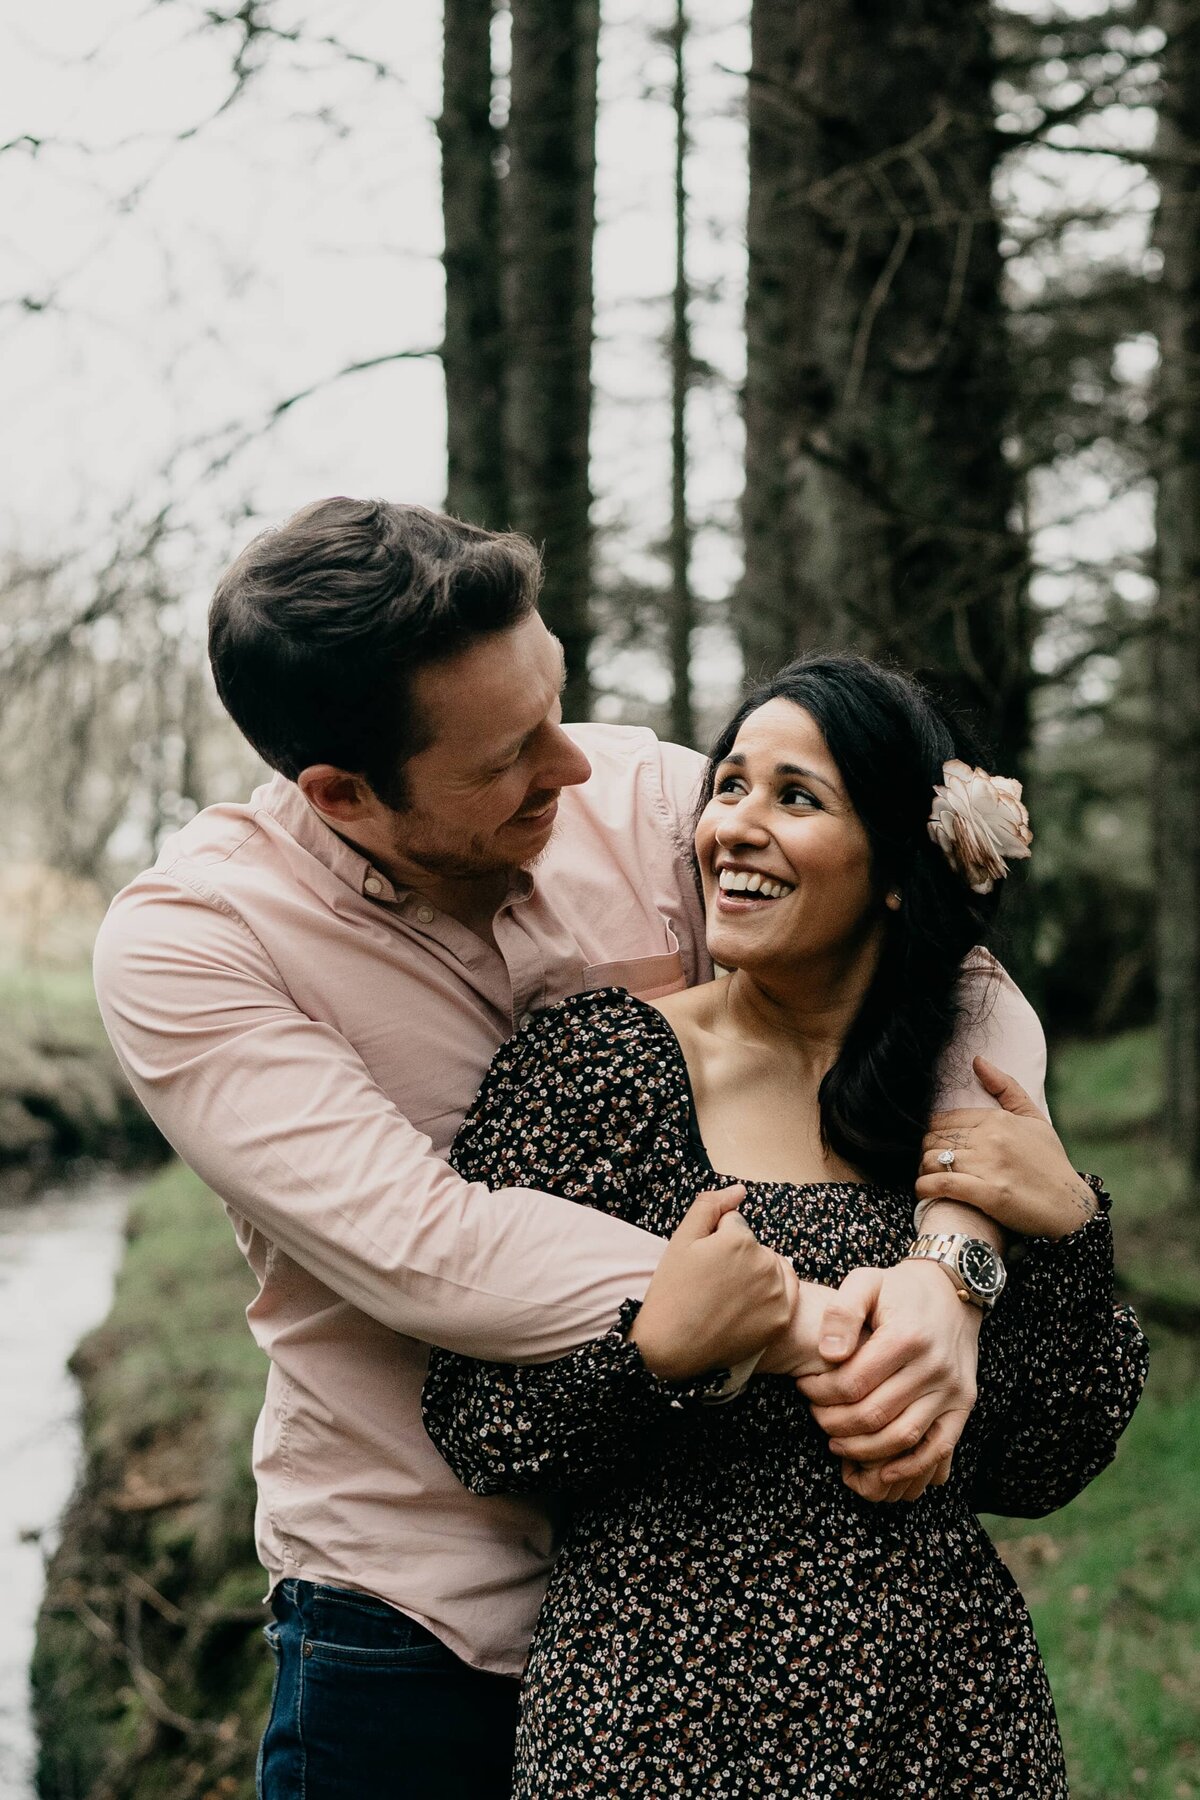 A man stands behind his fiancé, wraps his arms around her and they smile candidly at each other during their engagement photoshoot.